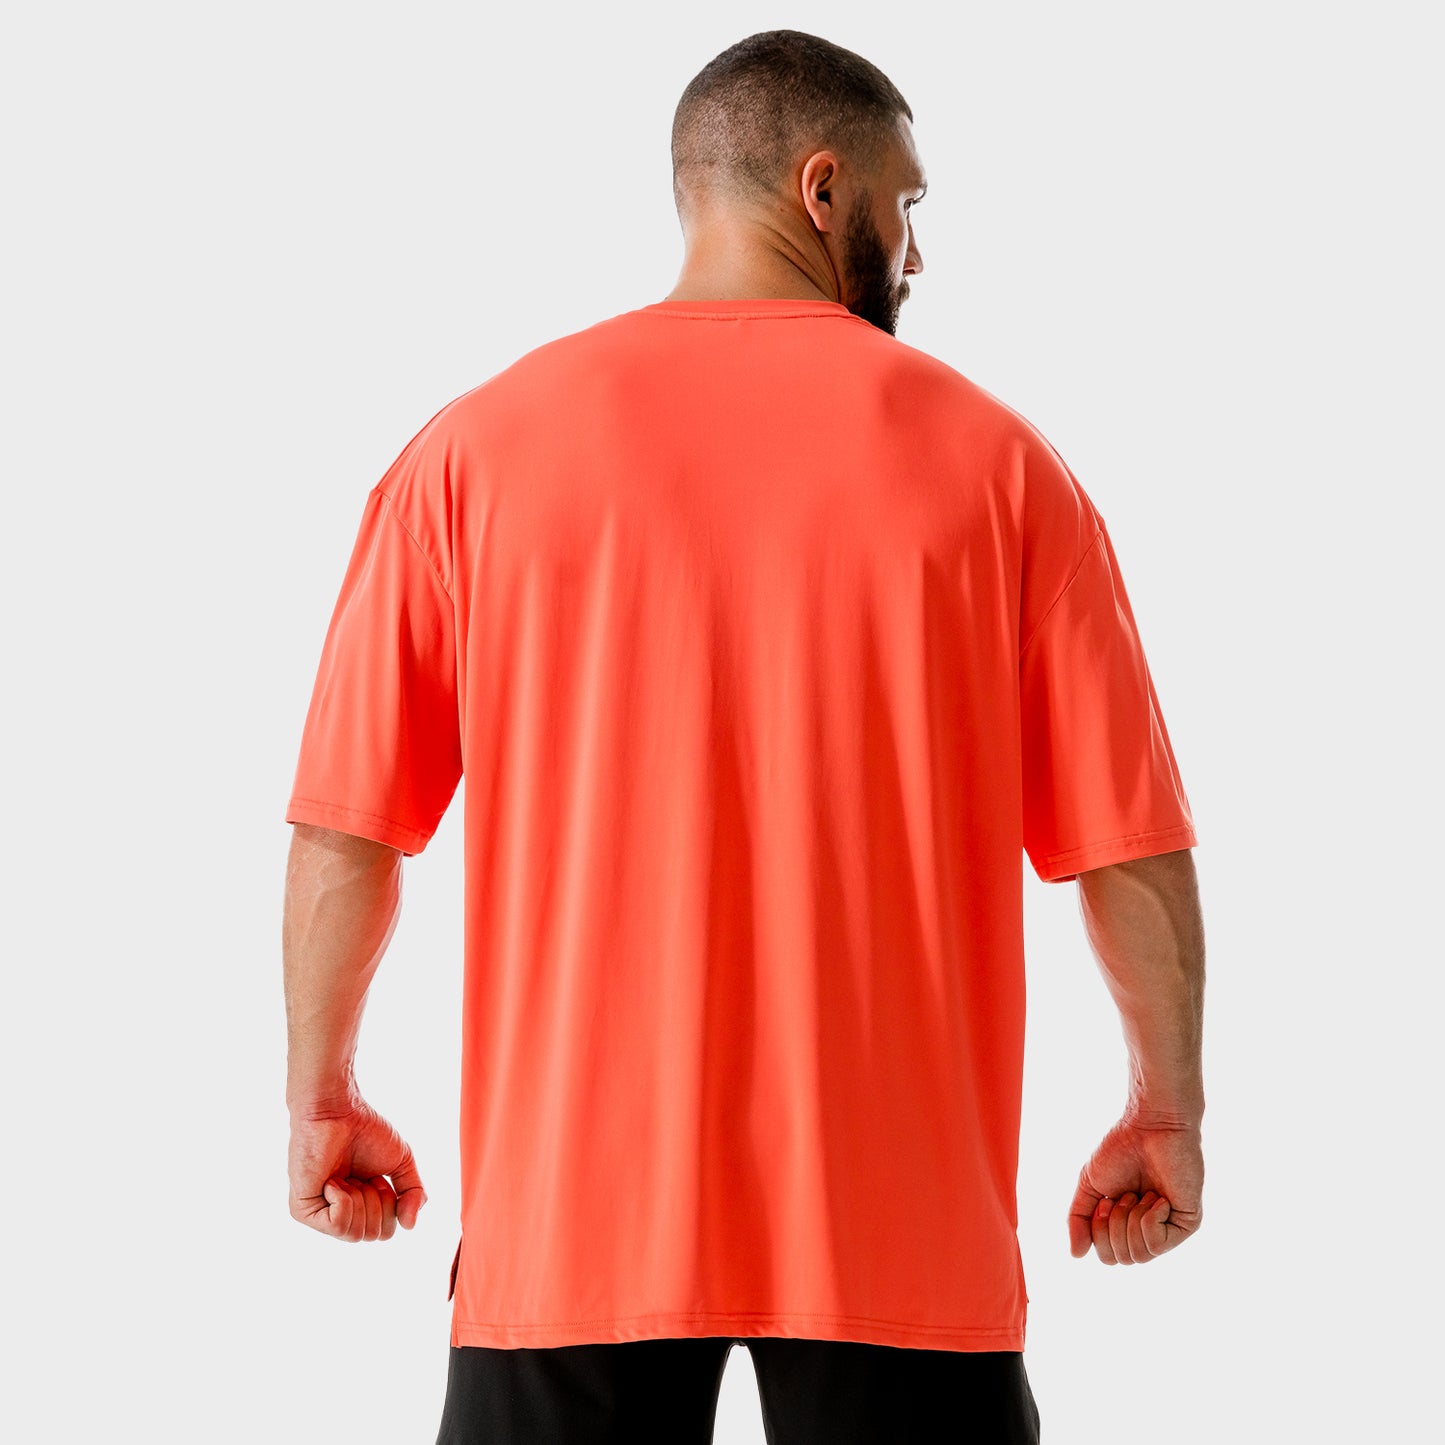 squatwolf-gym-wear-lab-360-oversized-tee-red-workout-shirts-for-men